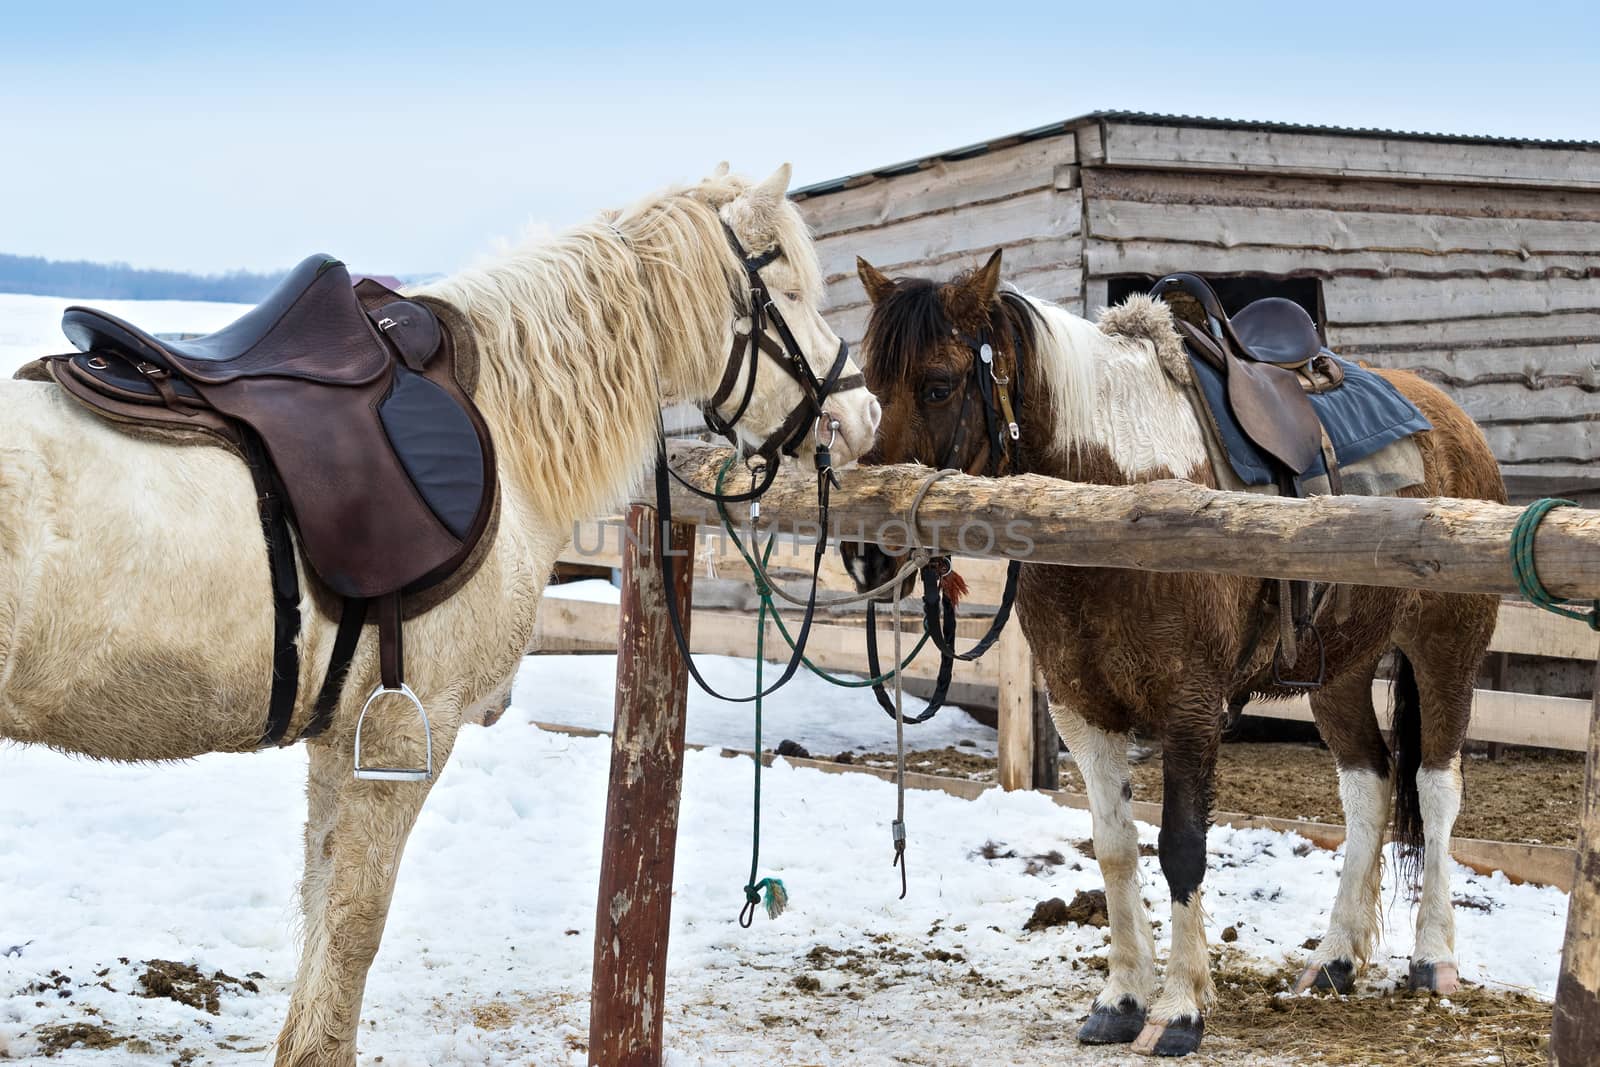 Horses in winter outdoors by Gaina